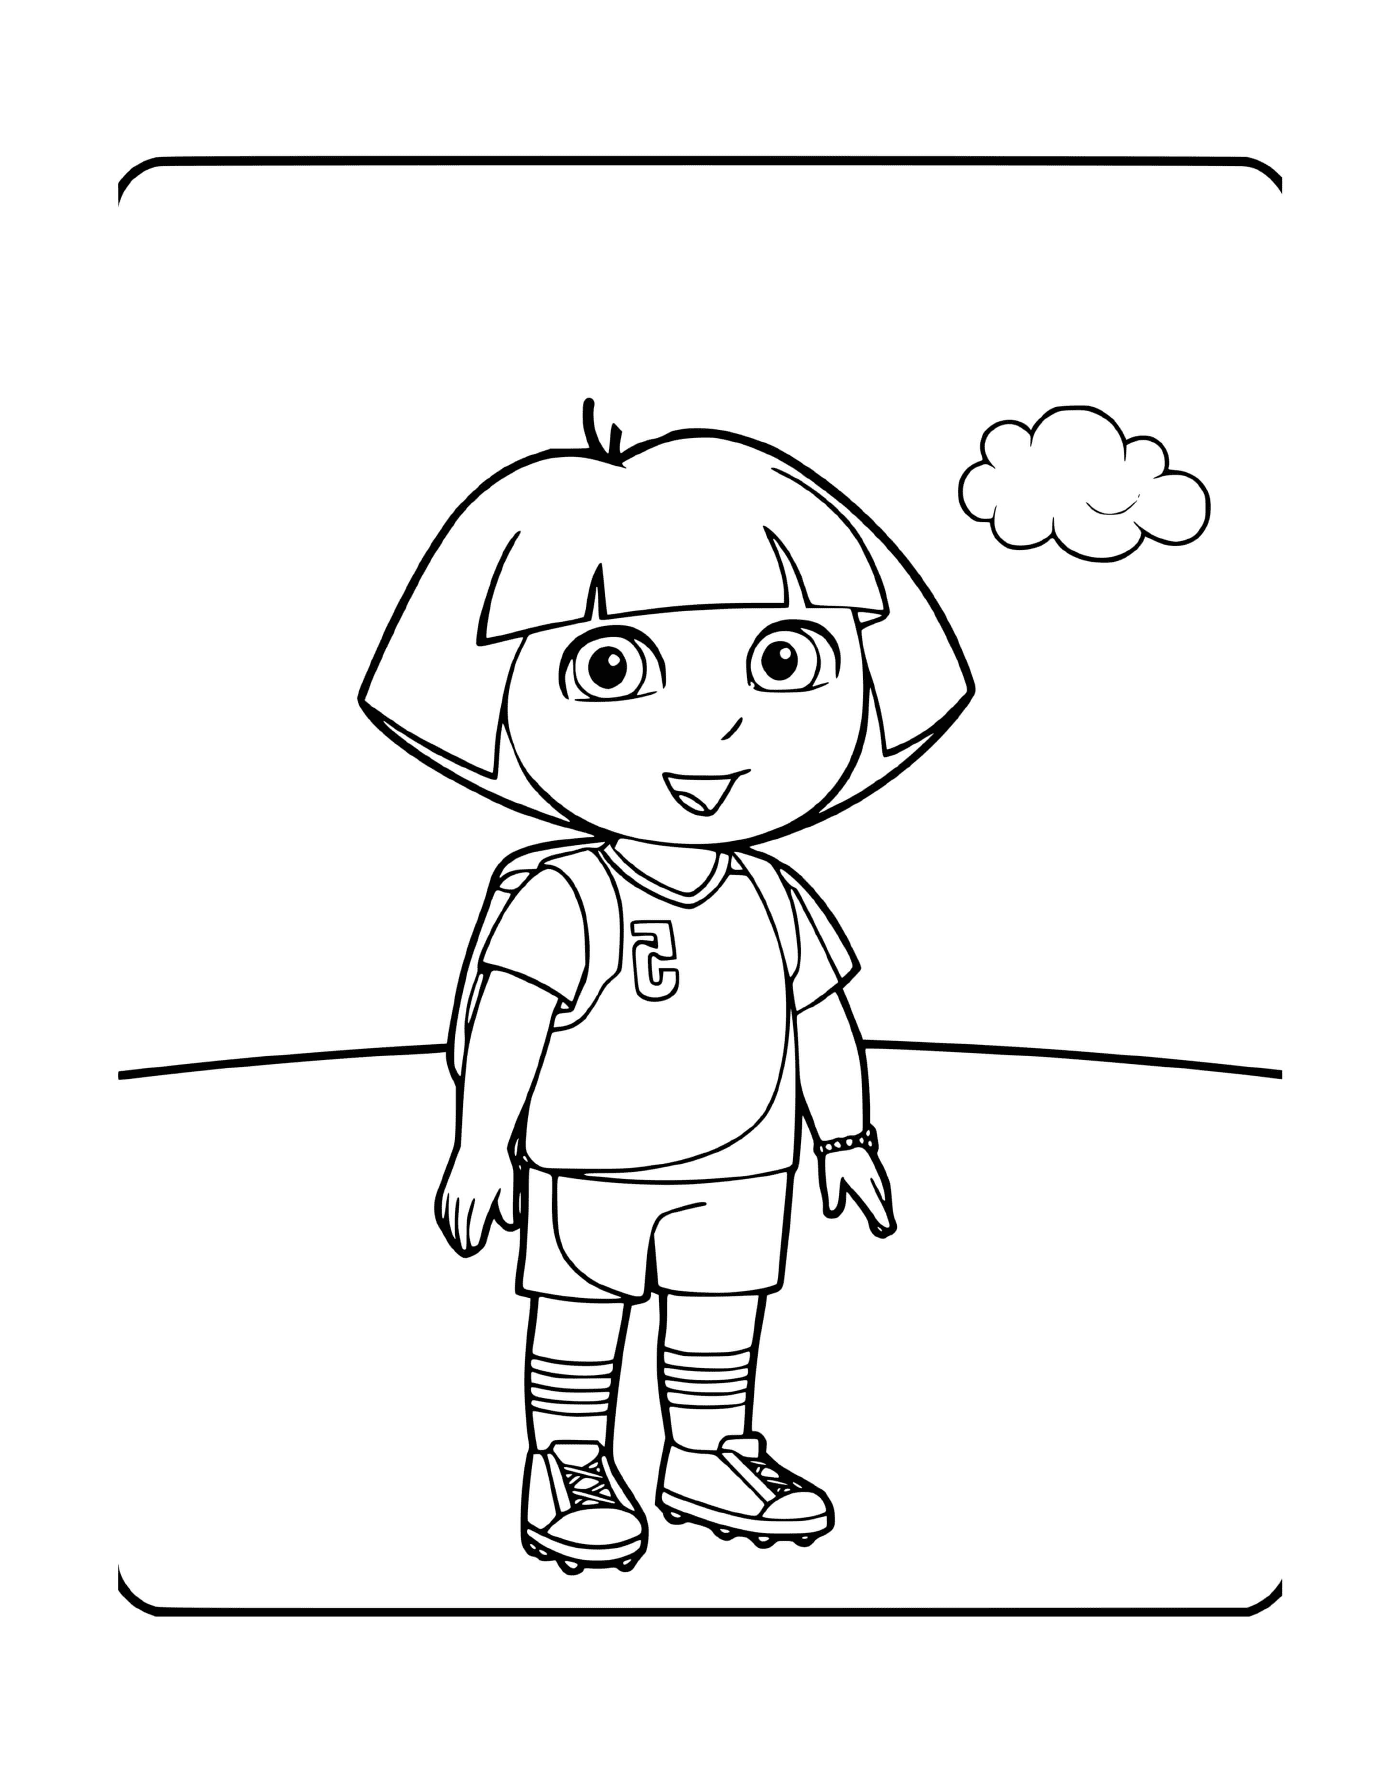  Dora plays football with passion 